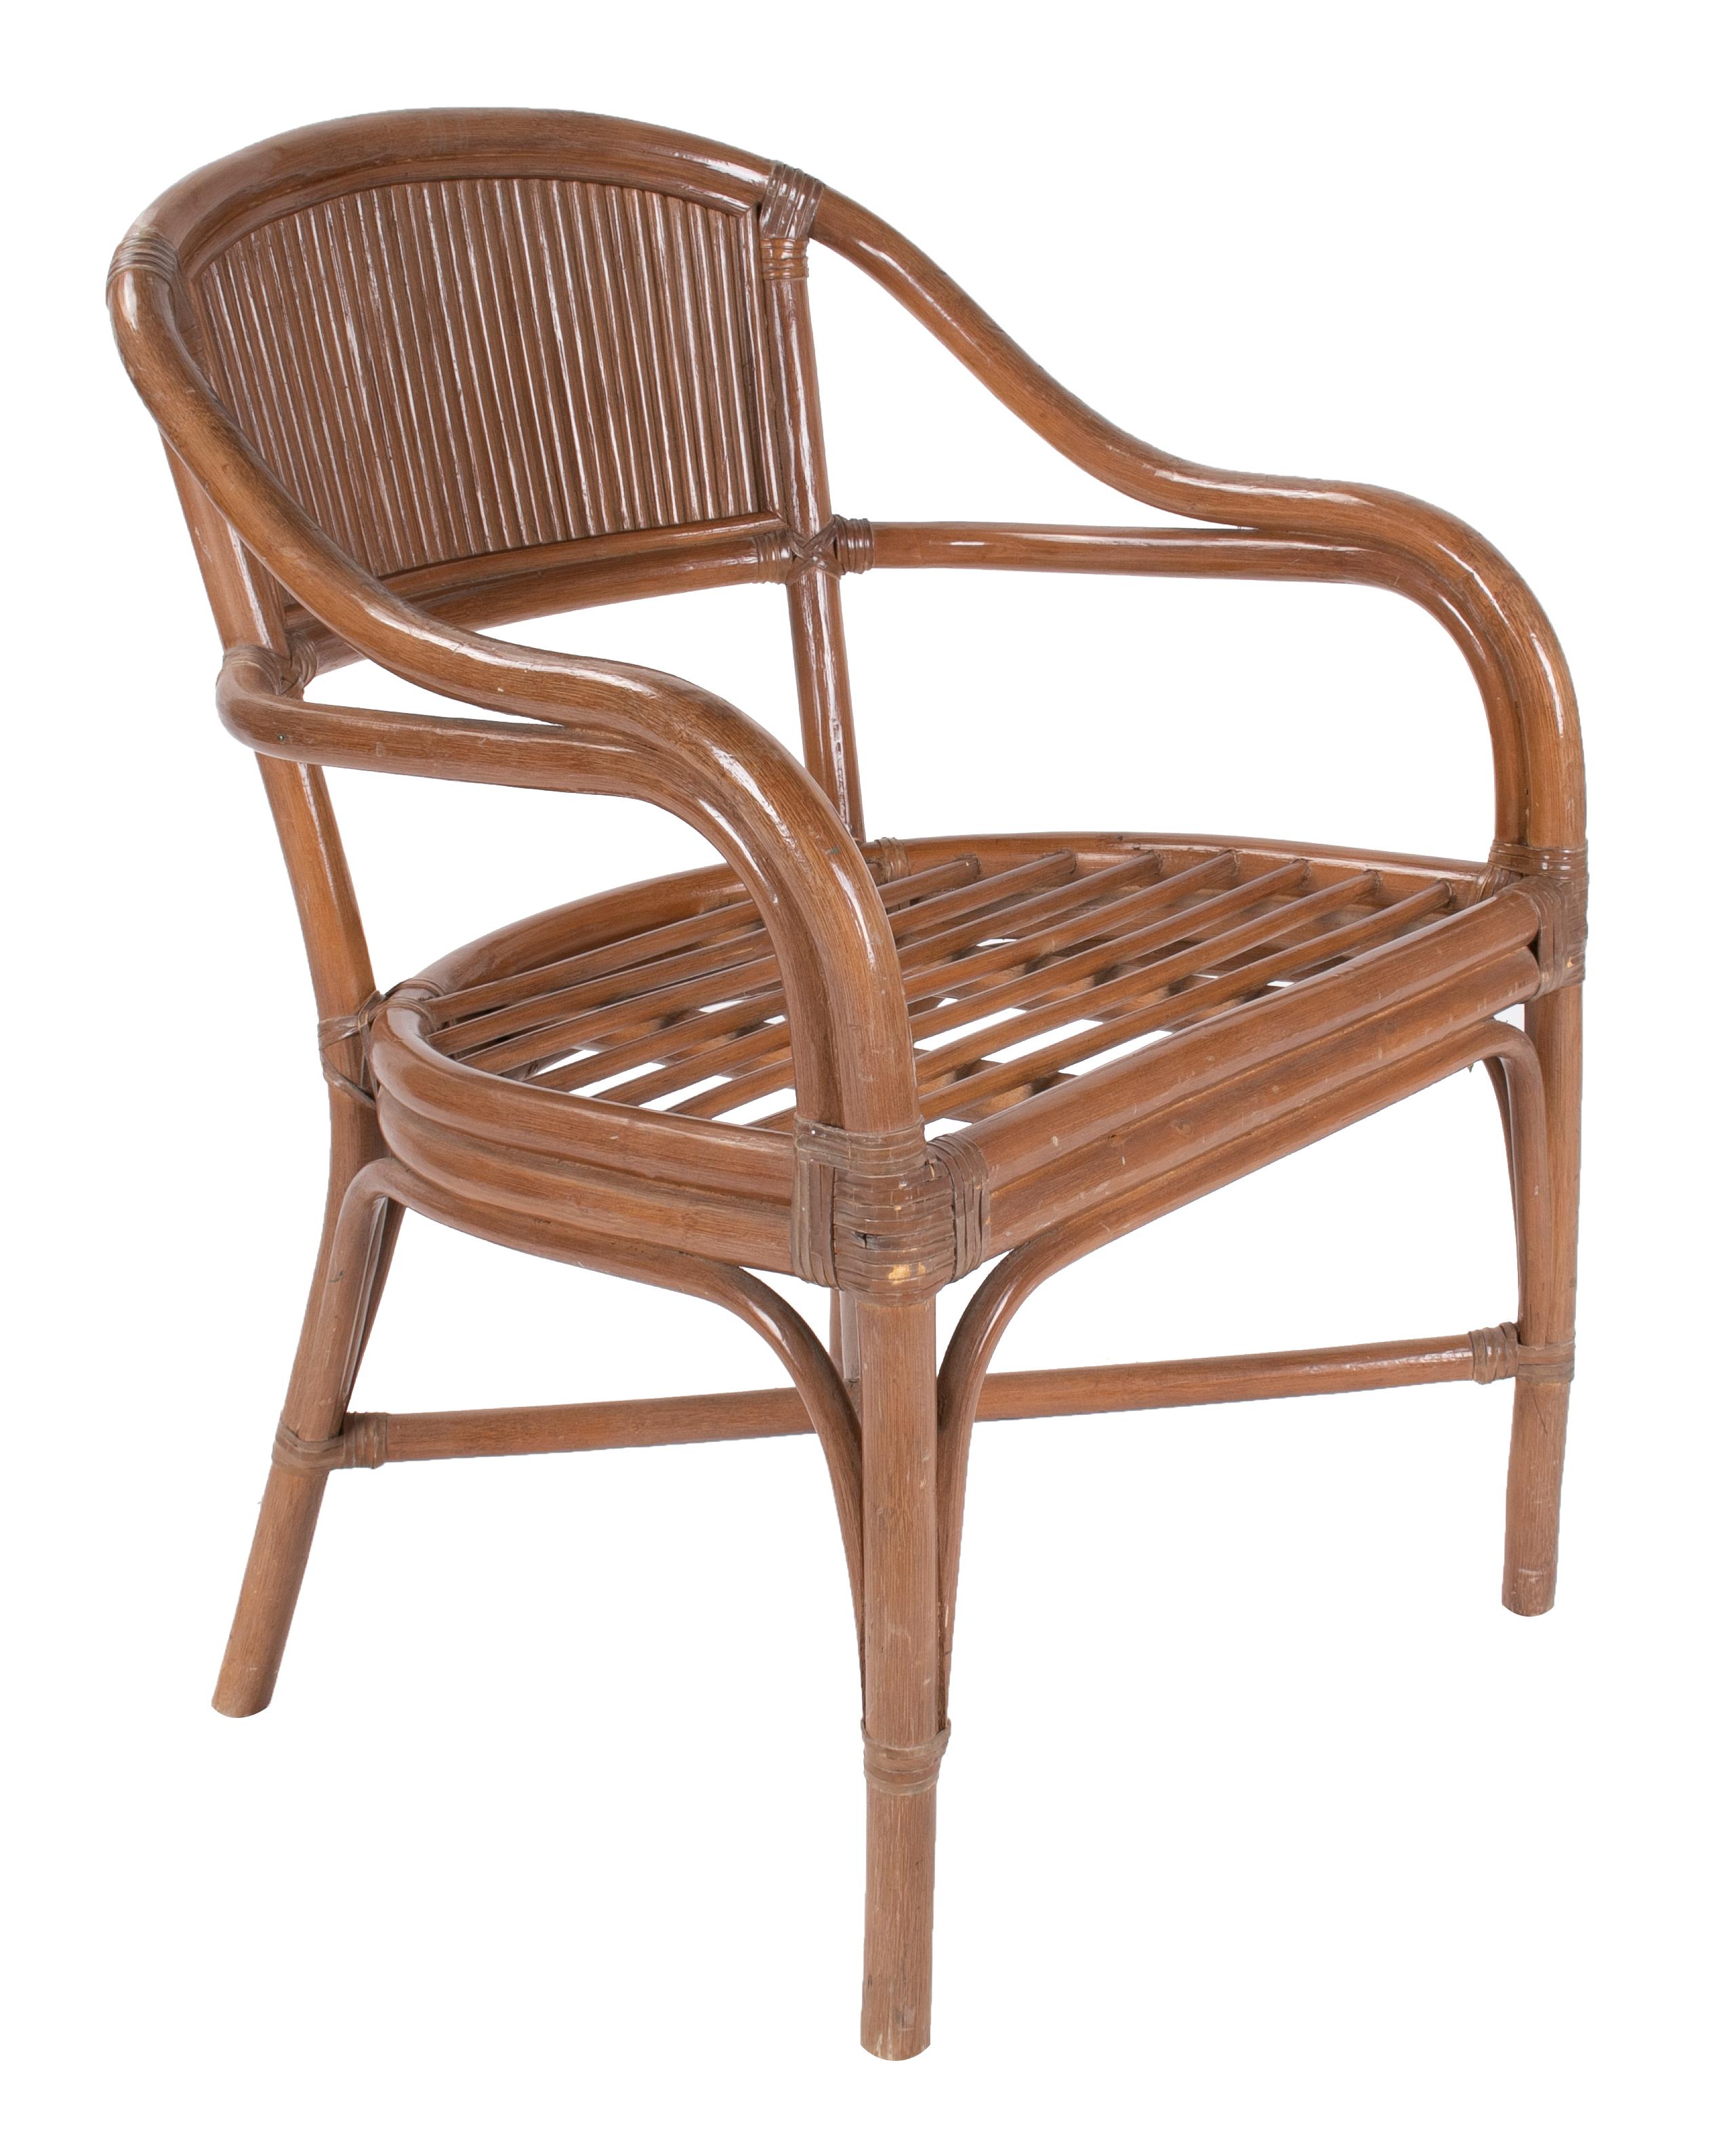 1980s set of four Spanish bamboo armchairs.